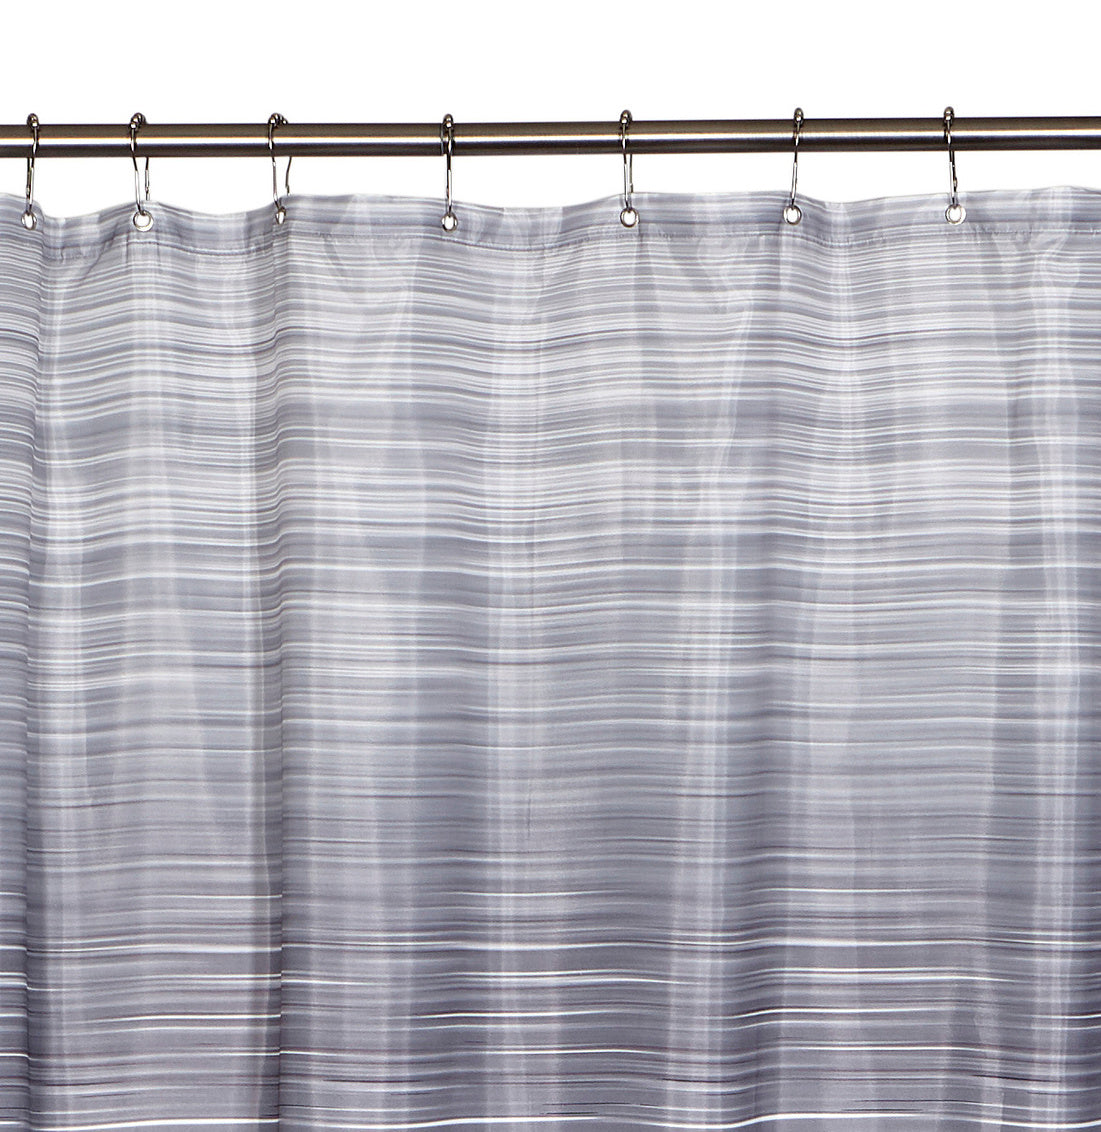 Ombre Line Shower Curtain